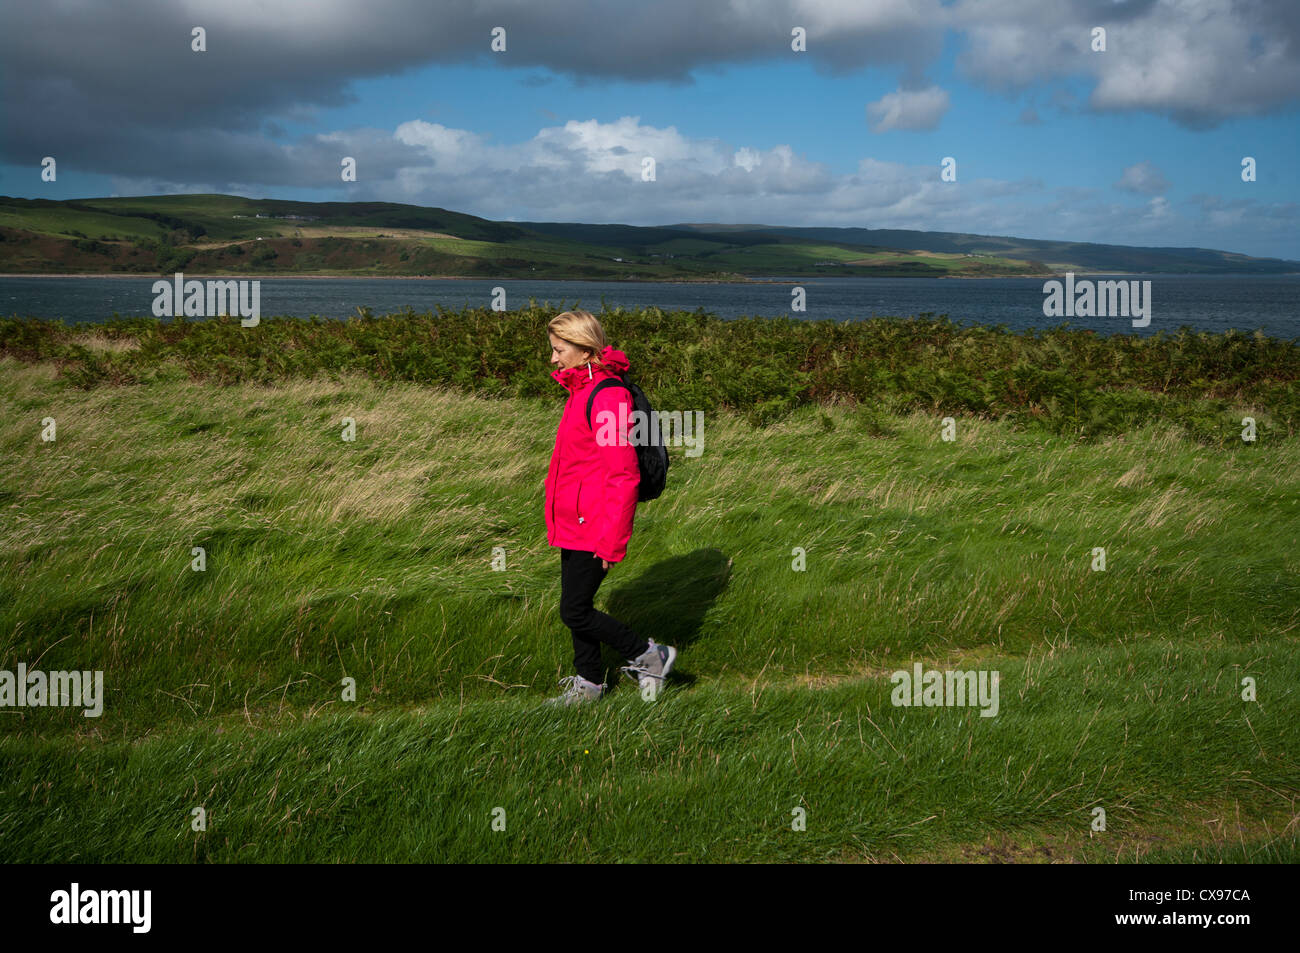 Side View Of A Woman Person Walking Through The Countryside Wearing Waterproof Clothing and A Rucksack Stock Photo